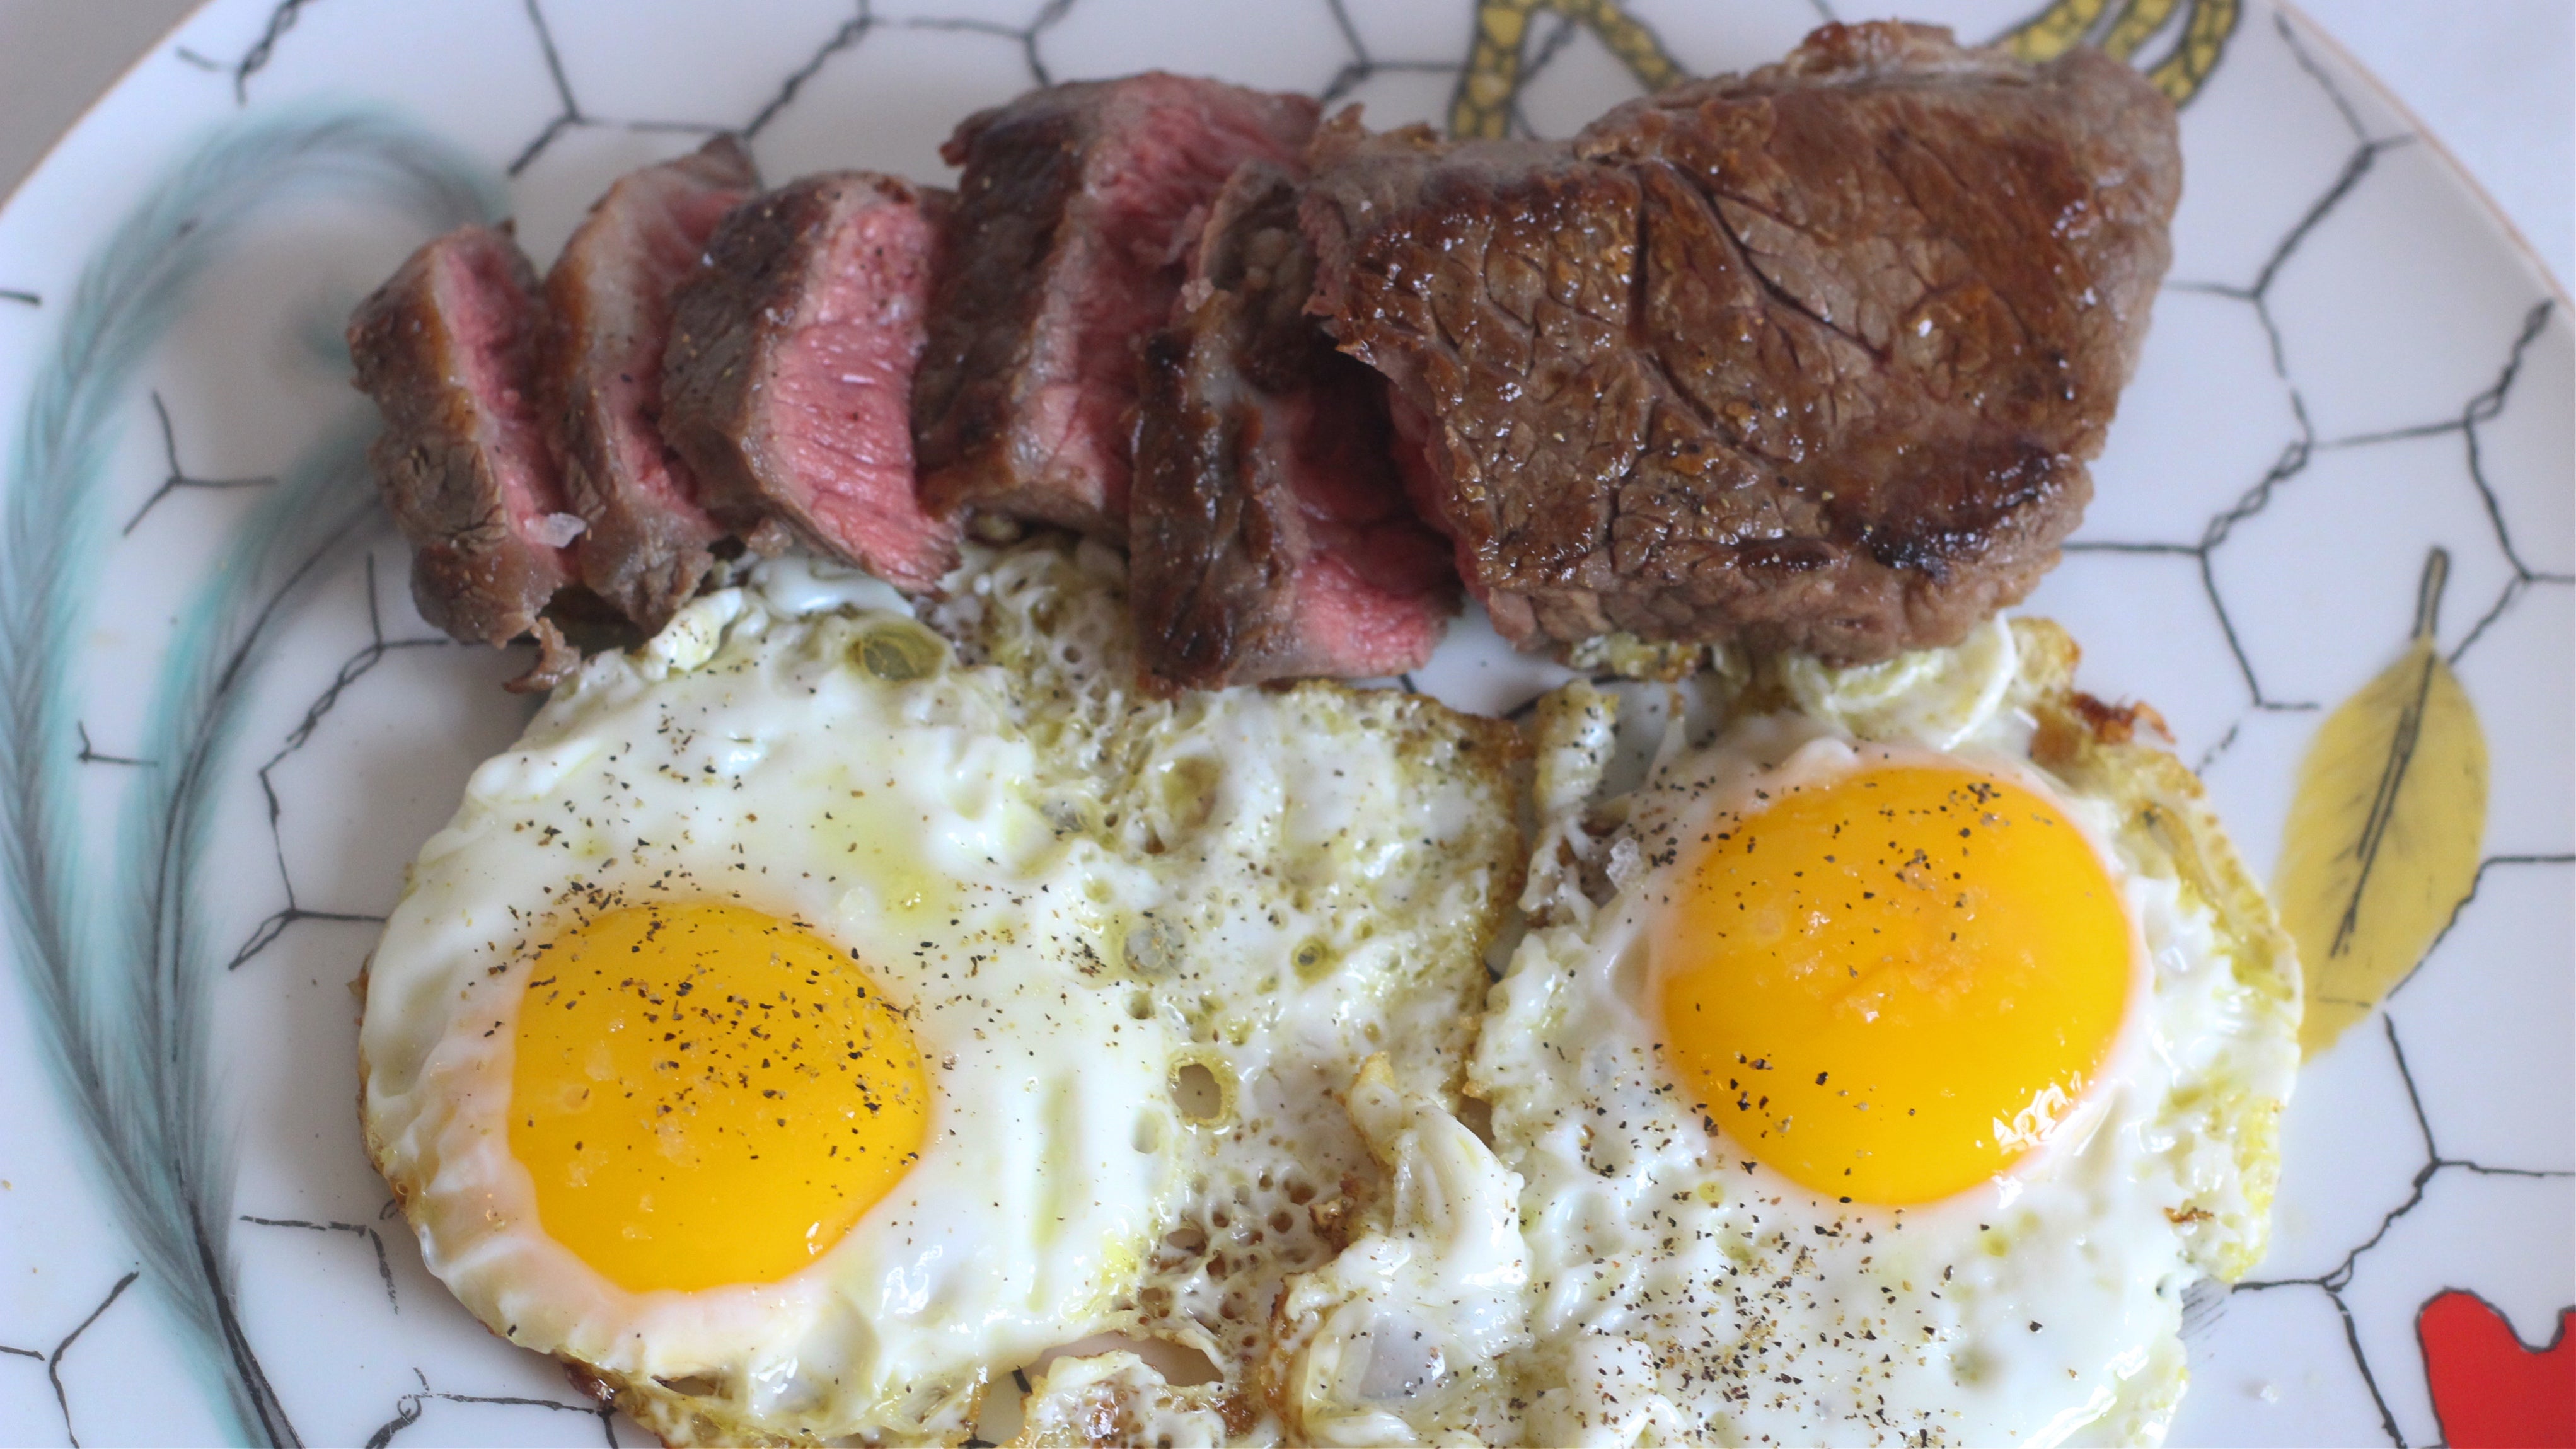 How To Make The Best Steak And Eggs